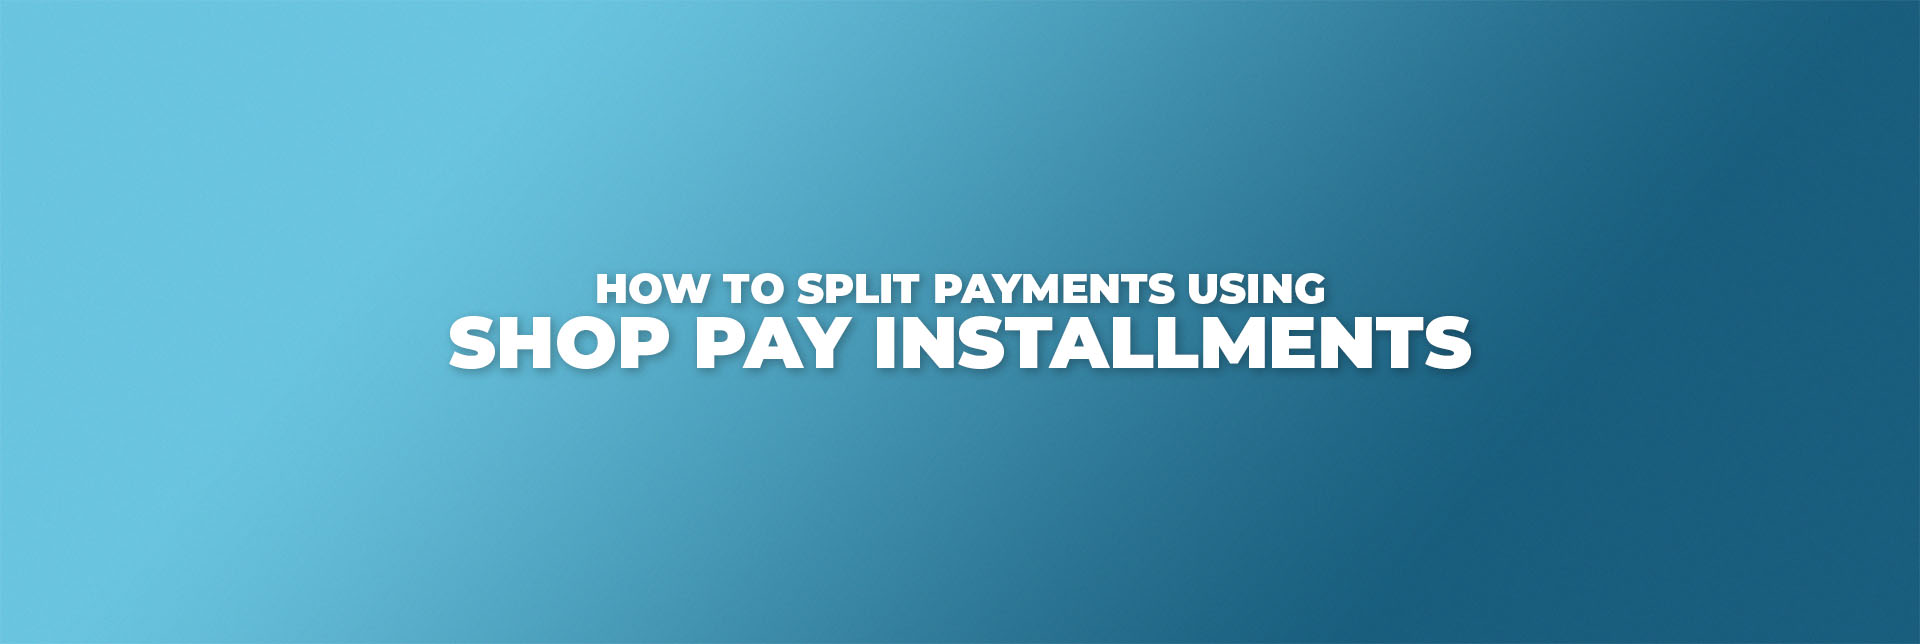 How to Split Payments using Shop Pay (Installments)